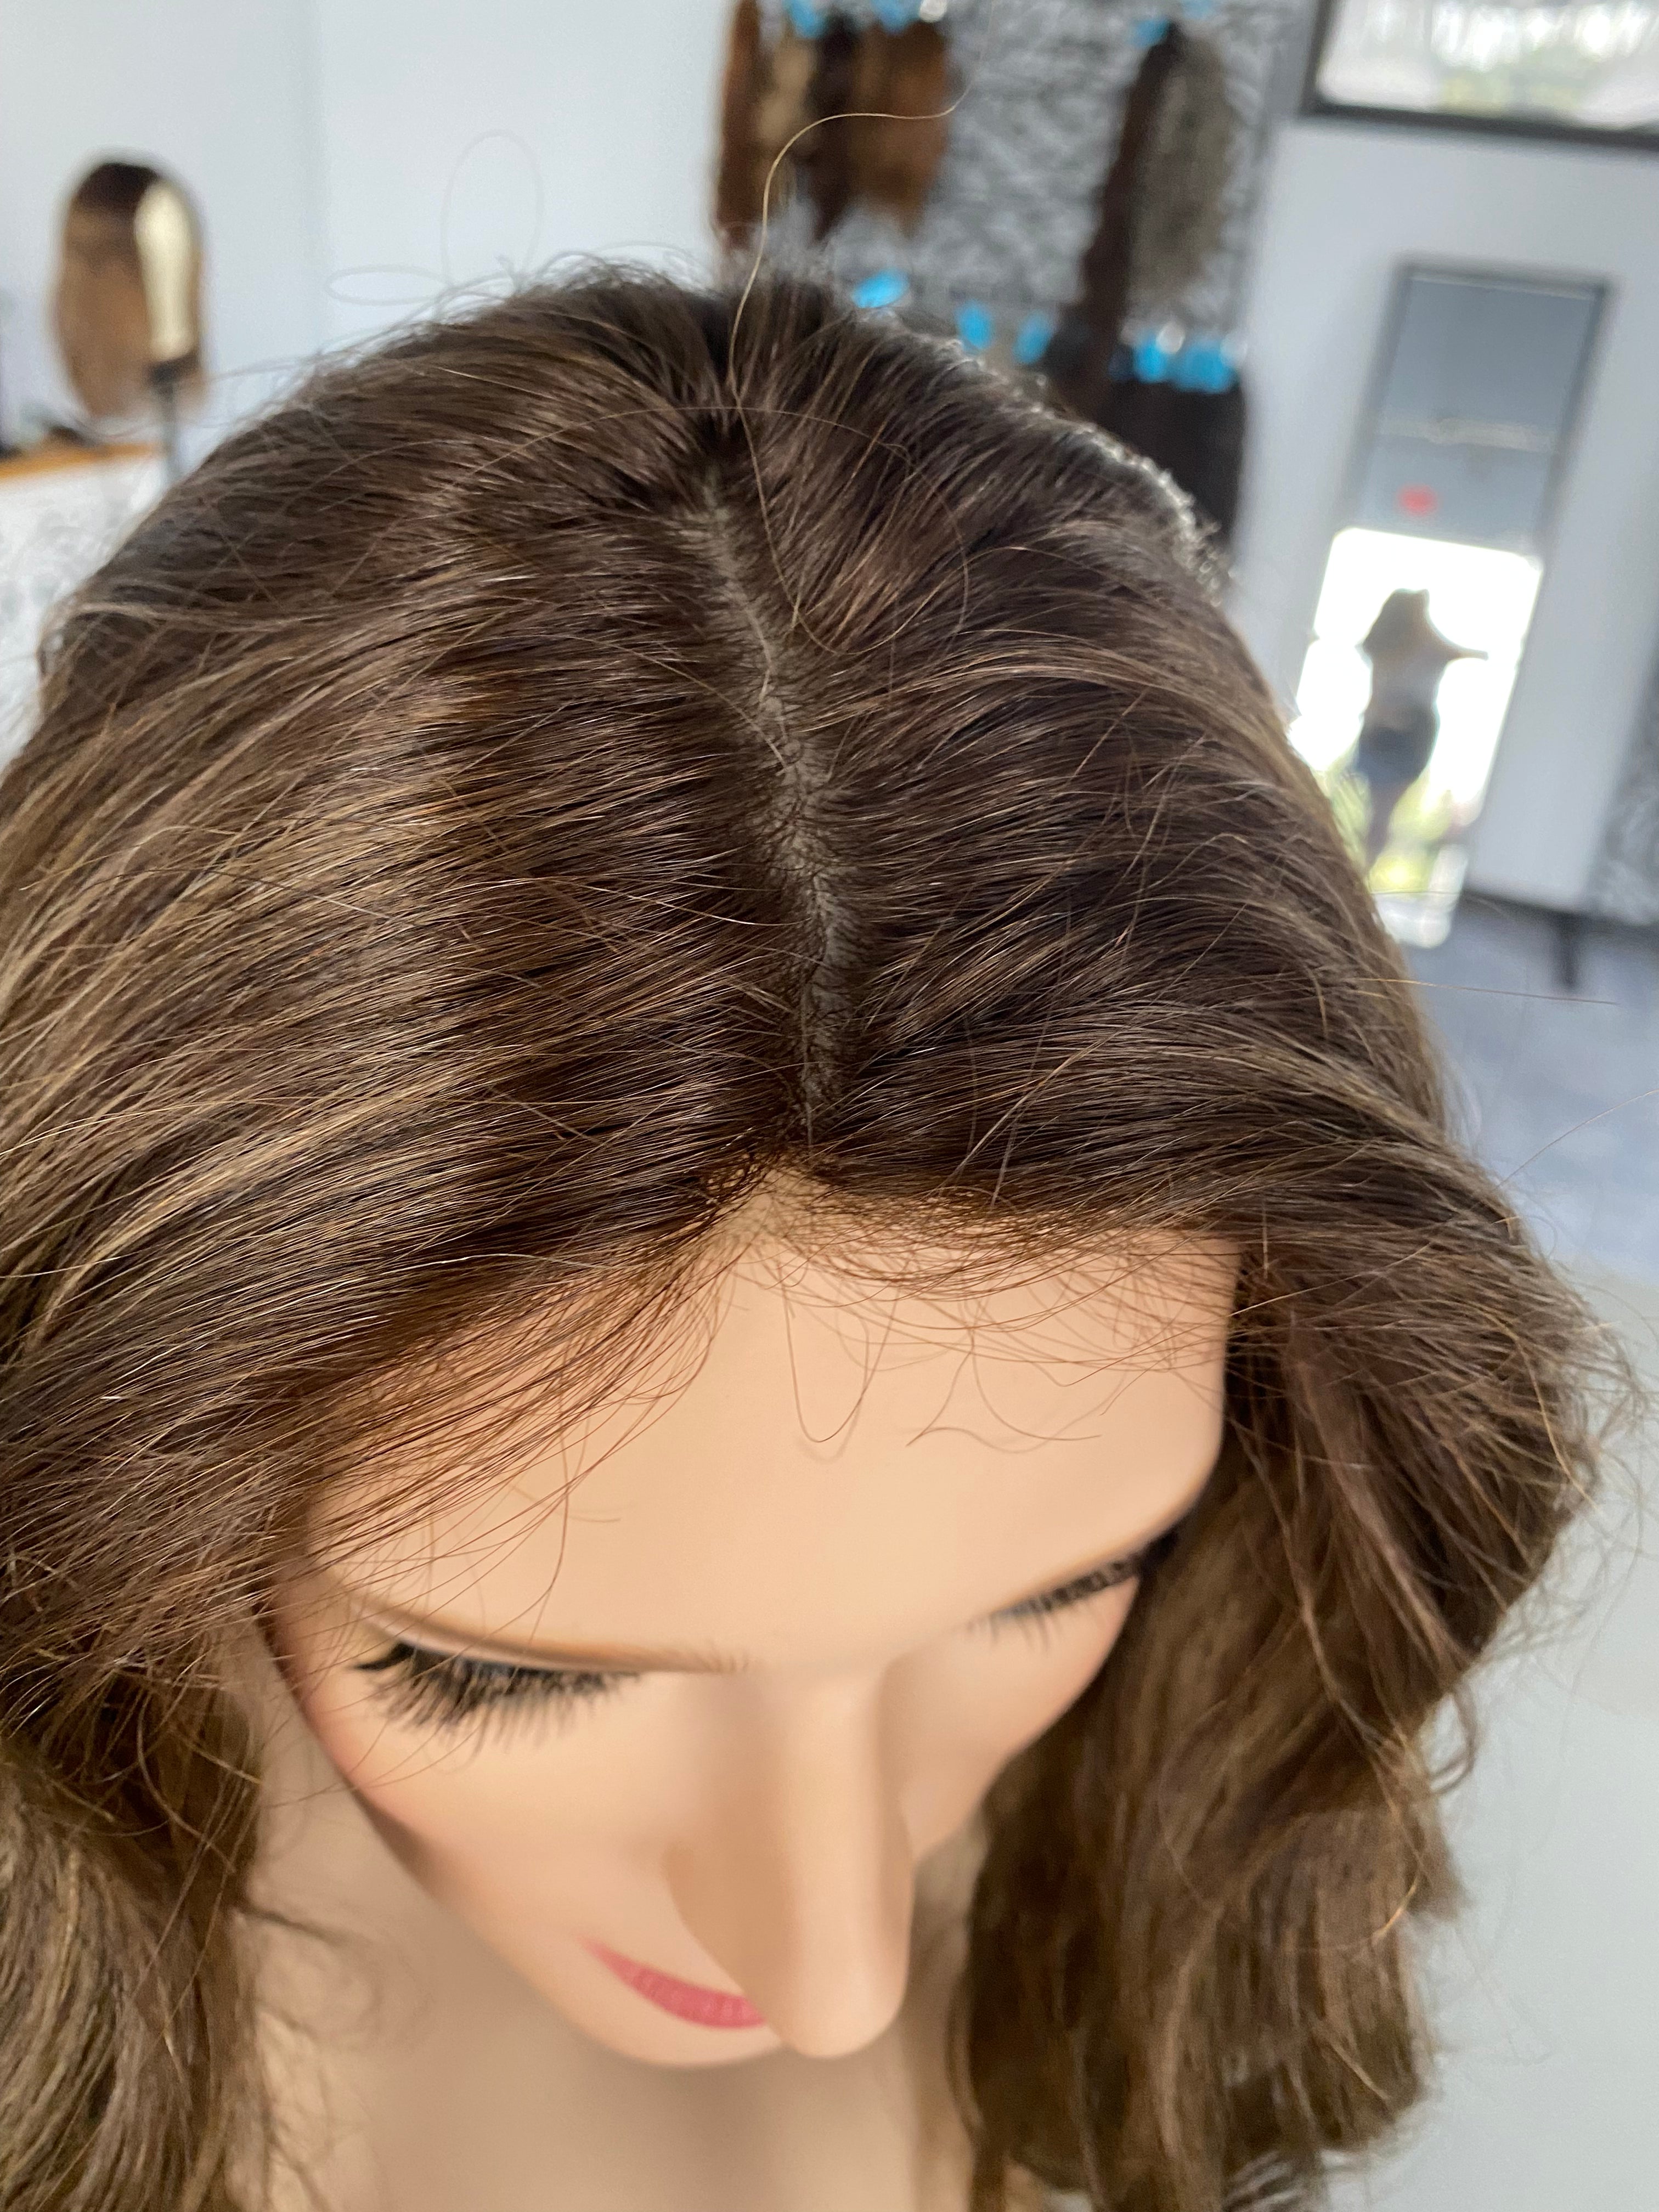 Full Wig- Cool Level 4 with Highlights, Small/medium Cap, 13-22"